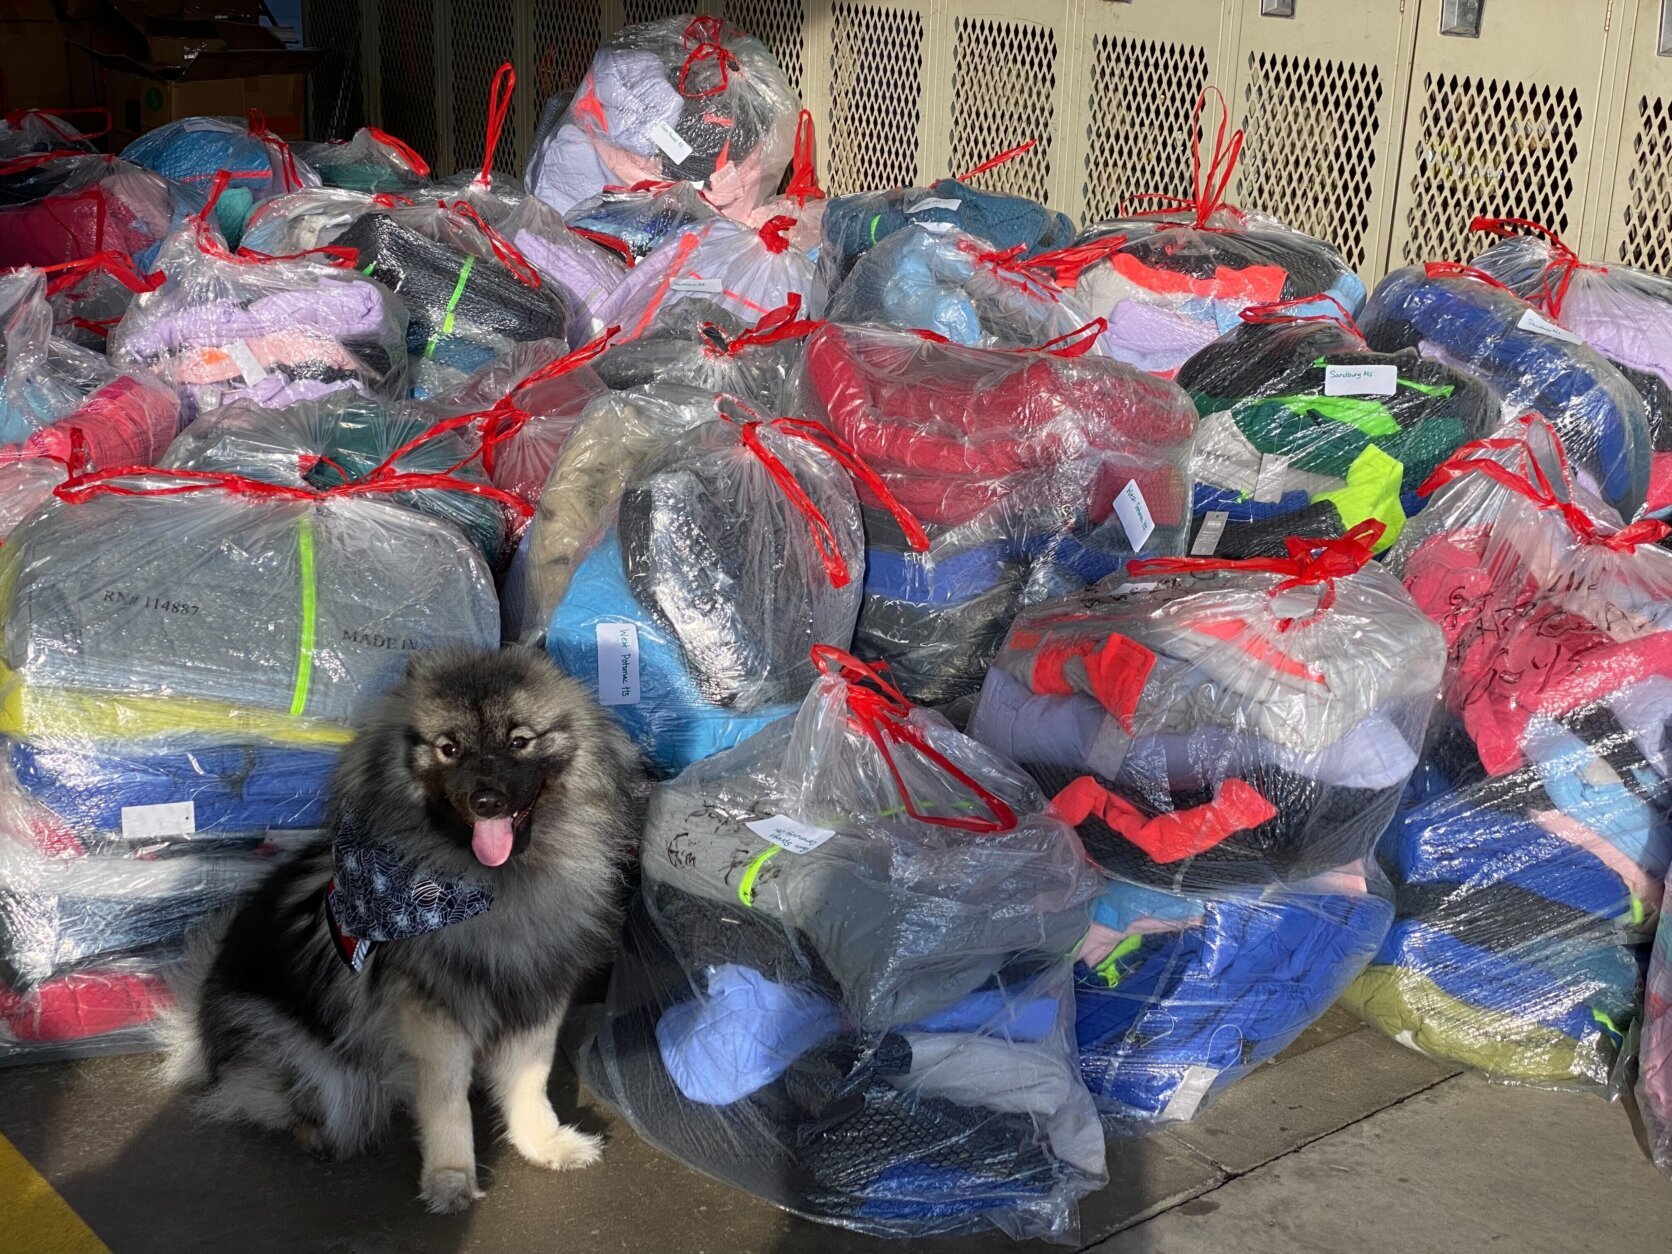 A dog stands in front of a pile of bags filled with winter coats